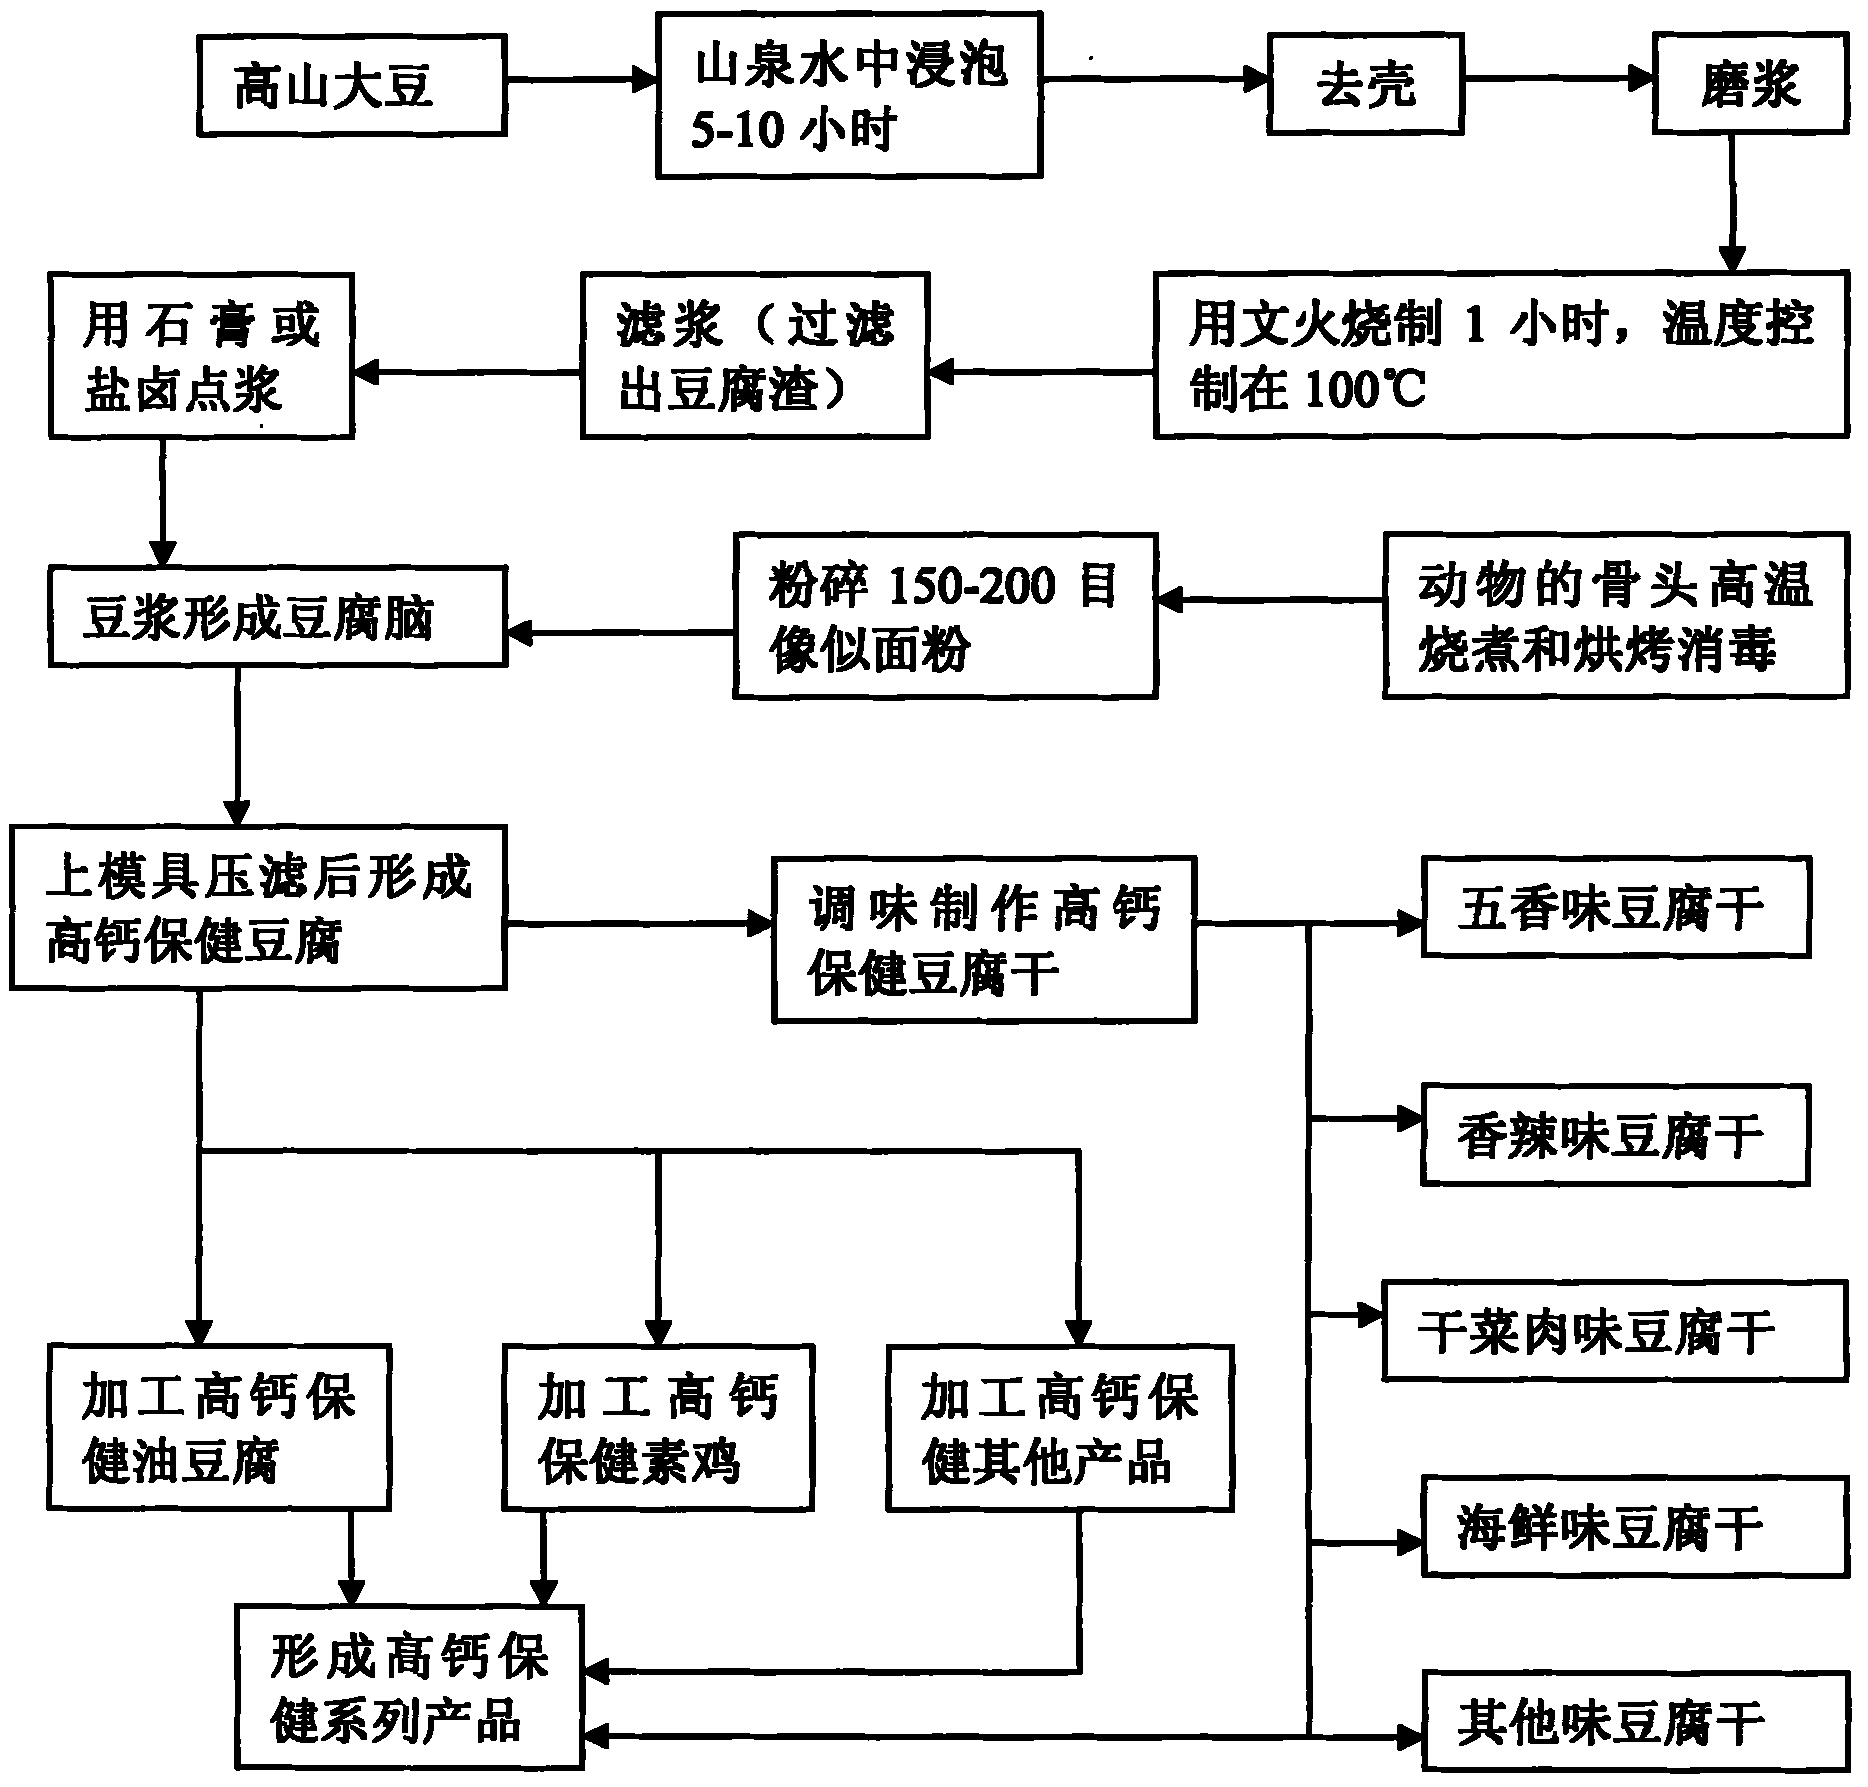 Production method of healthcare bean product